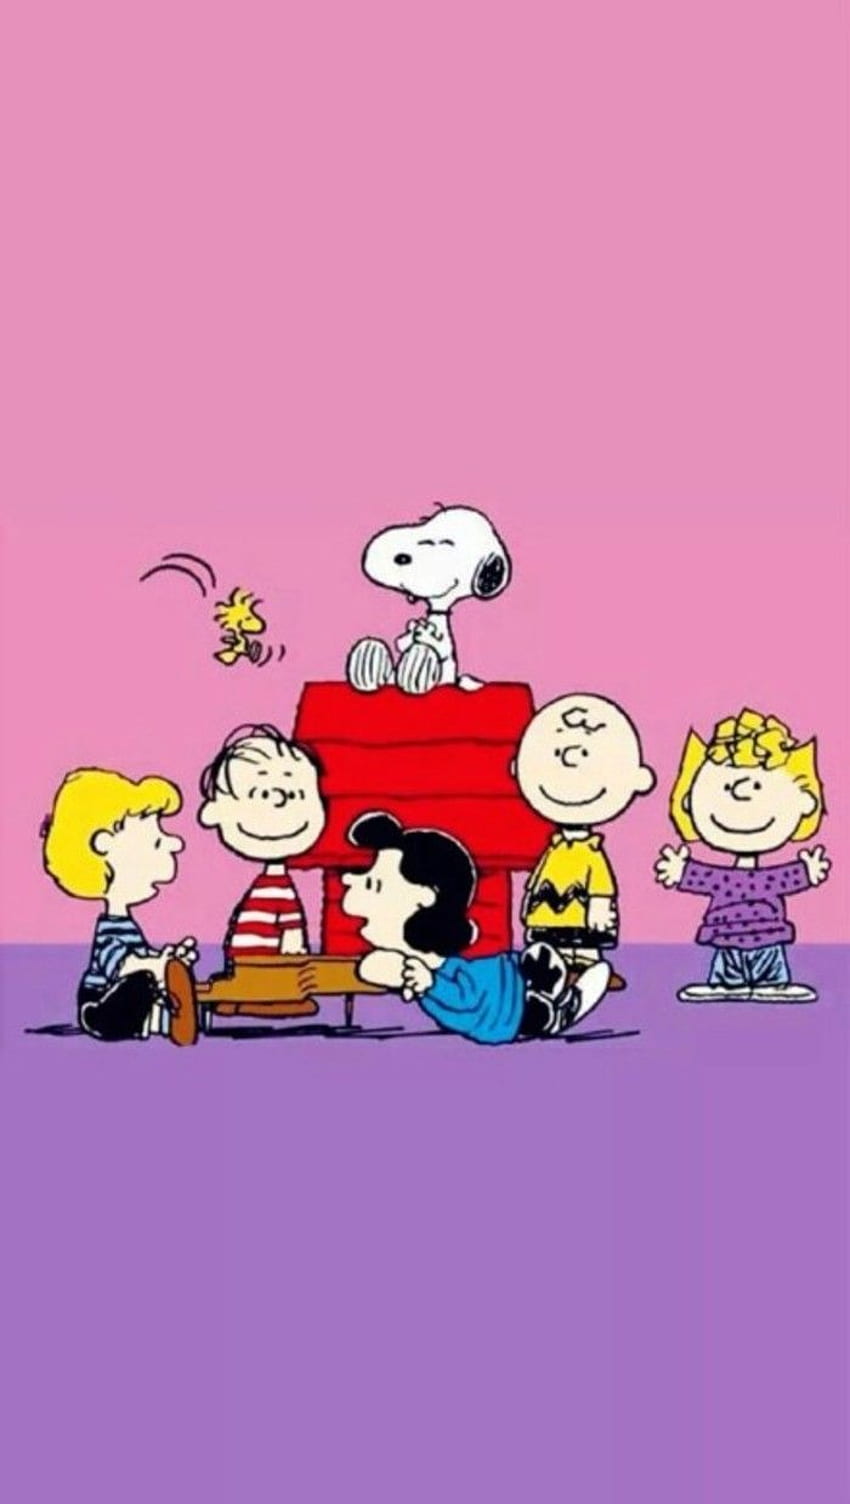 1080x1920 Peanuts Wallpapers for Android Mobile Smartphone Full HD